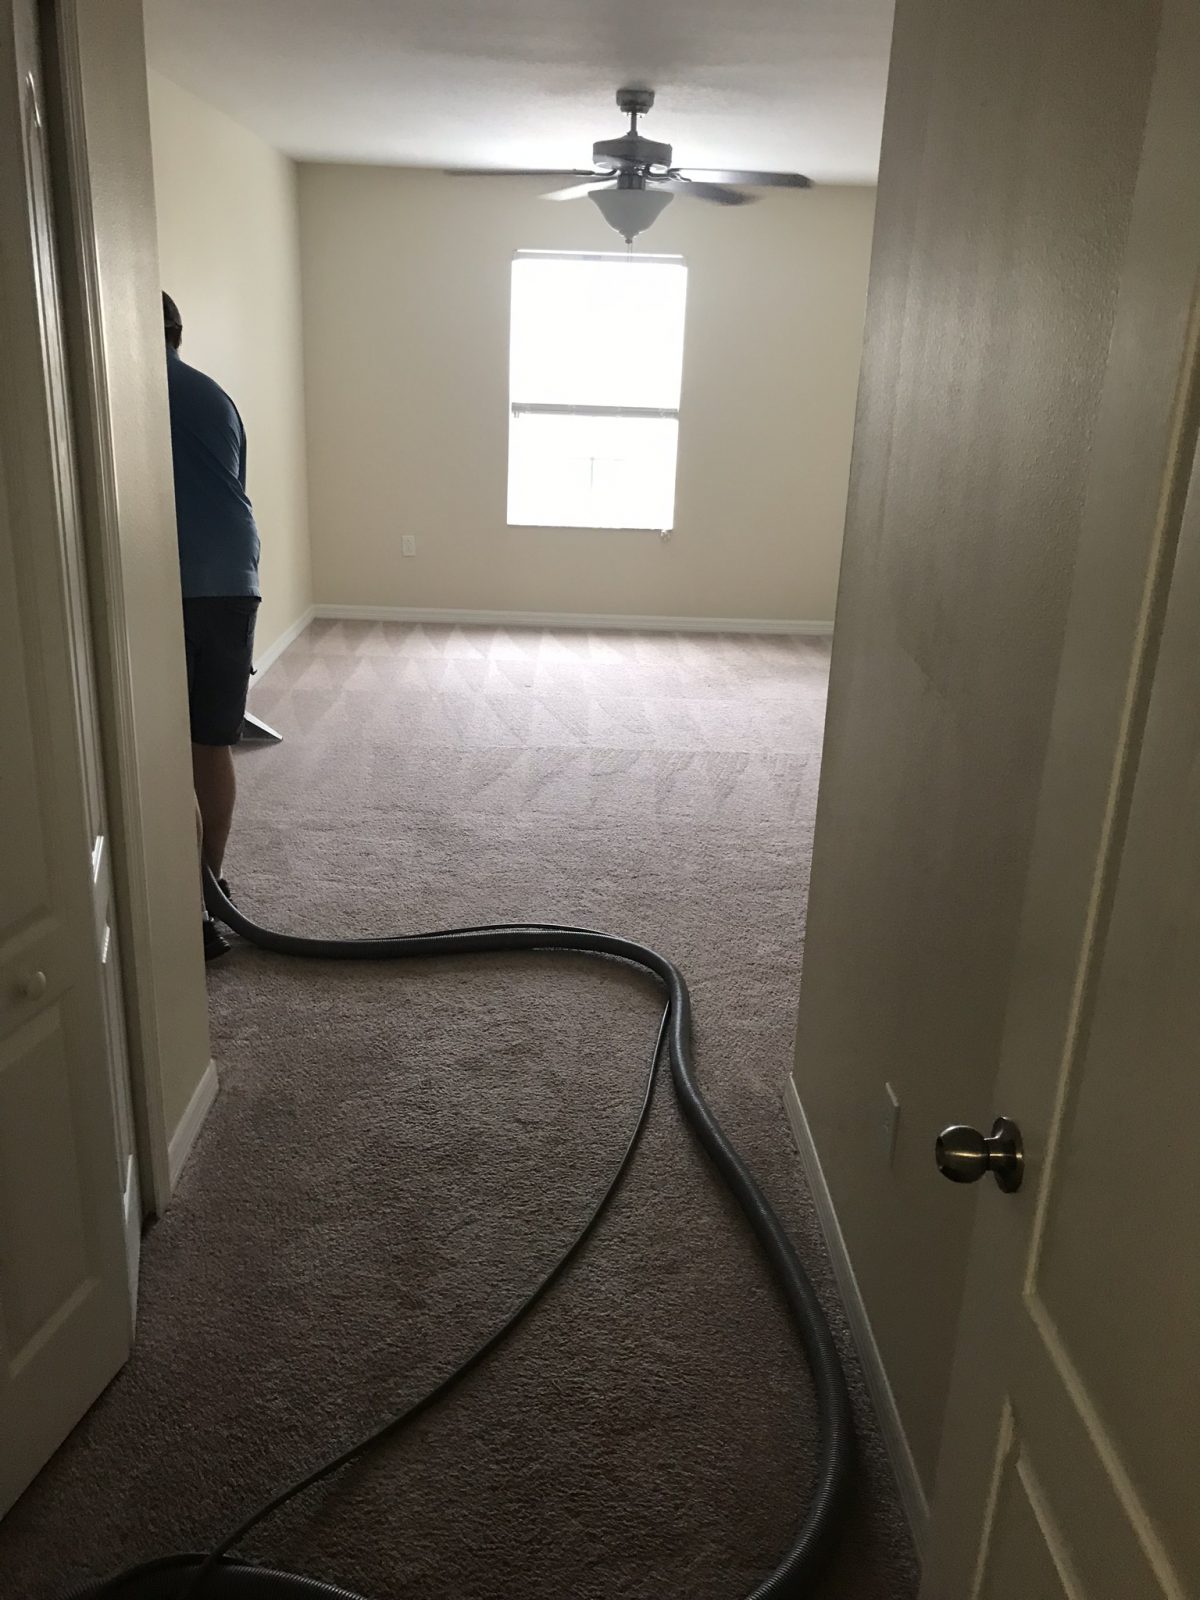 Professional Carpet Cleaning Oldsmar Florida by Howards Cleaning Service